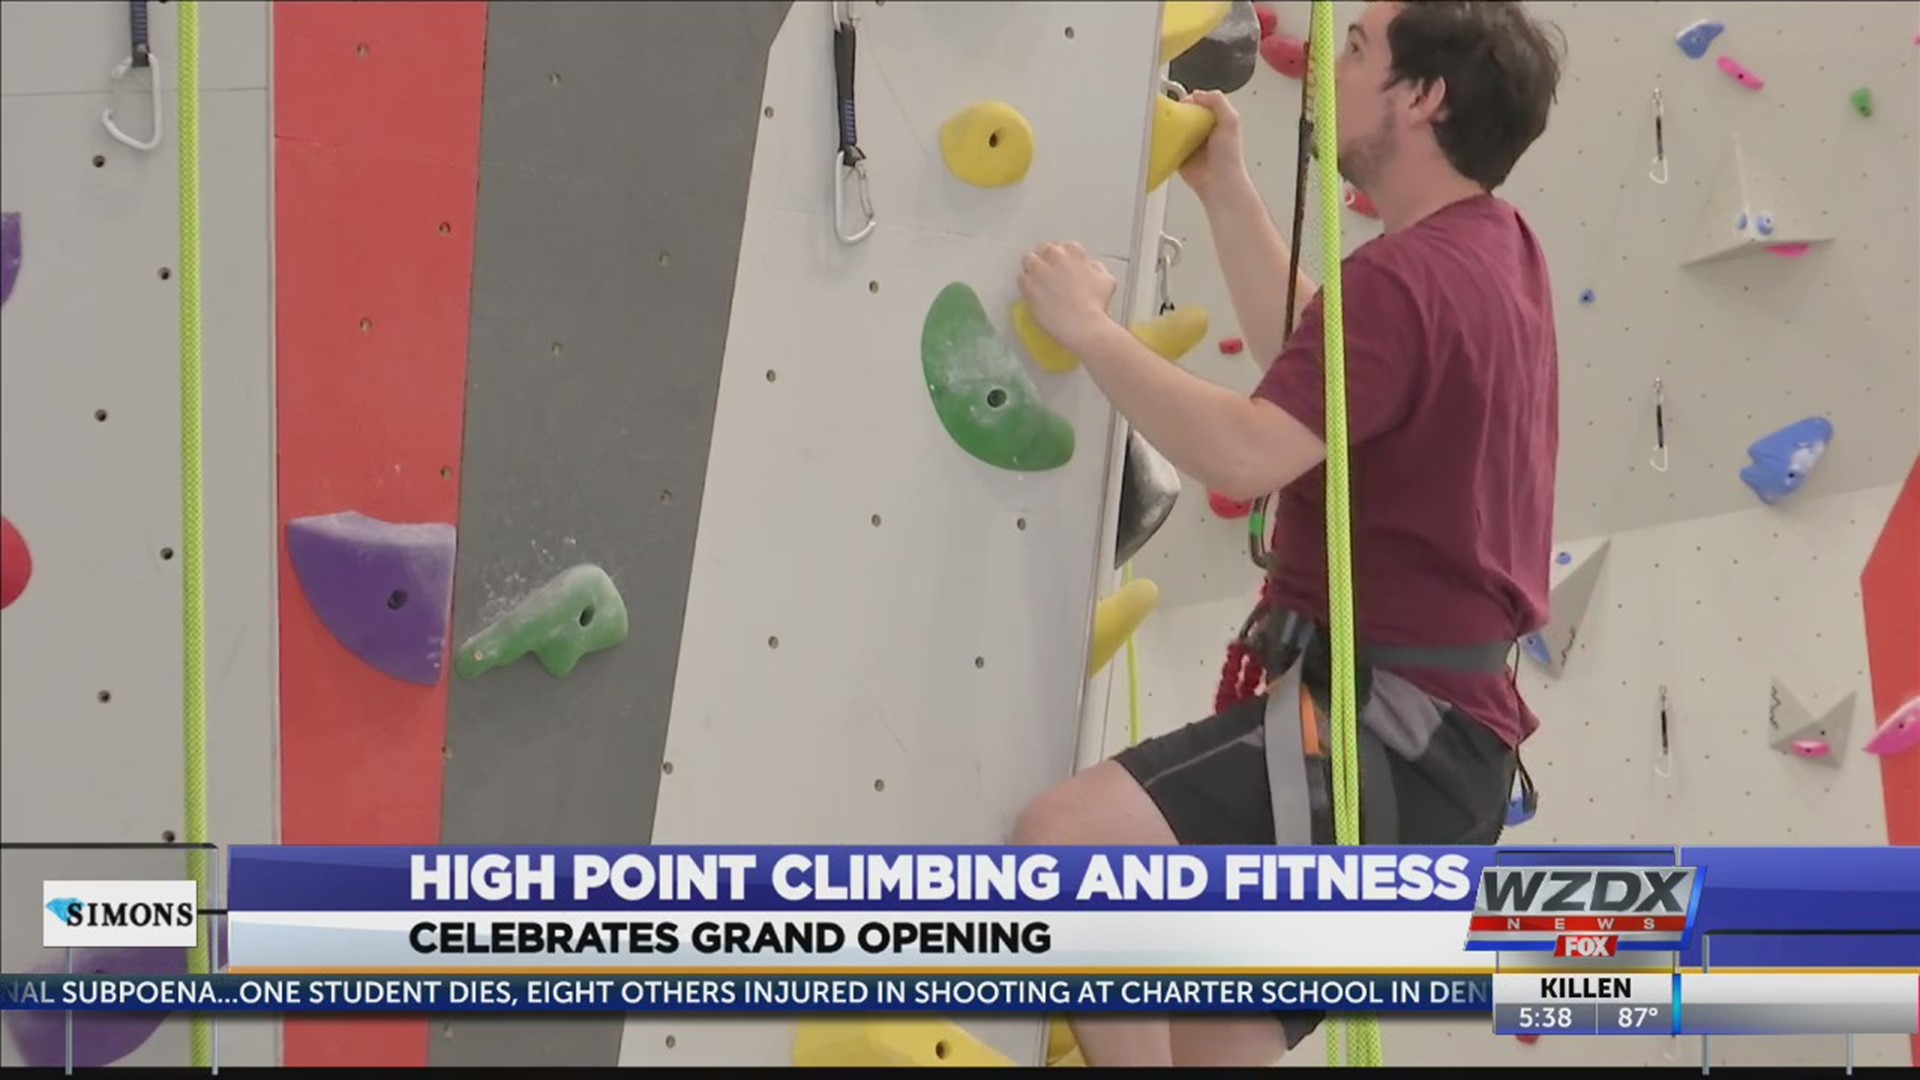 High Point Climbing and Fitness celebrates their grand opening today. The event, which features free coffee, day pass and gear specials, food trucks, and beer, goes until 10pm tonight.